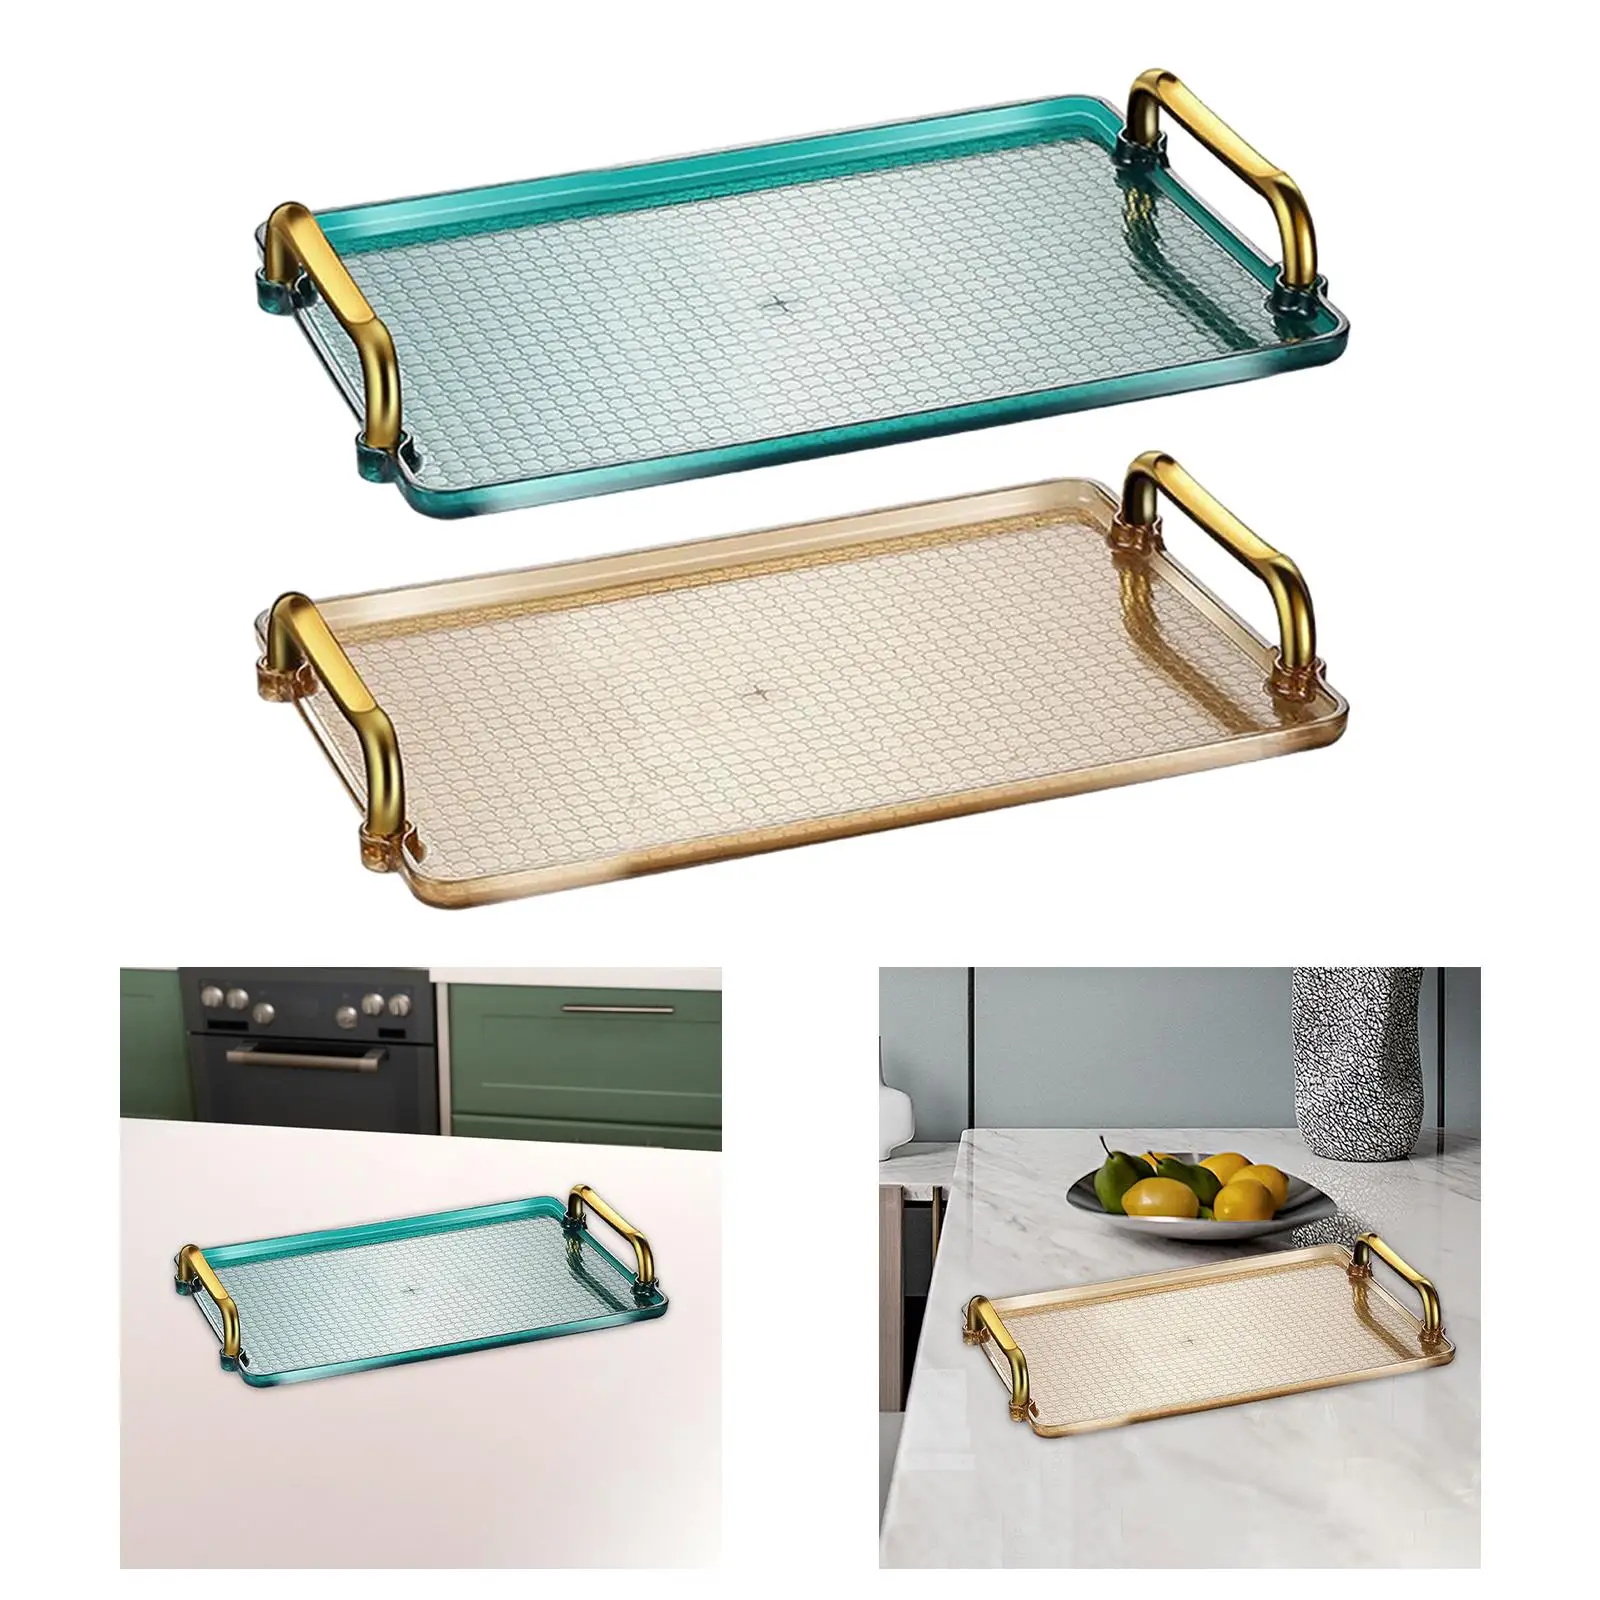 Serving Tray Platter Multipurpose Durable for Homes, Hotels, Bars Serving Pastries, Snacks, Coffee, Tea Ottoman Tray Rectangular